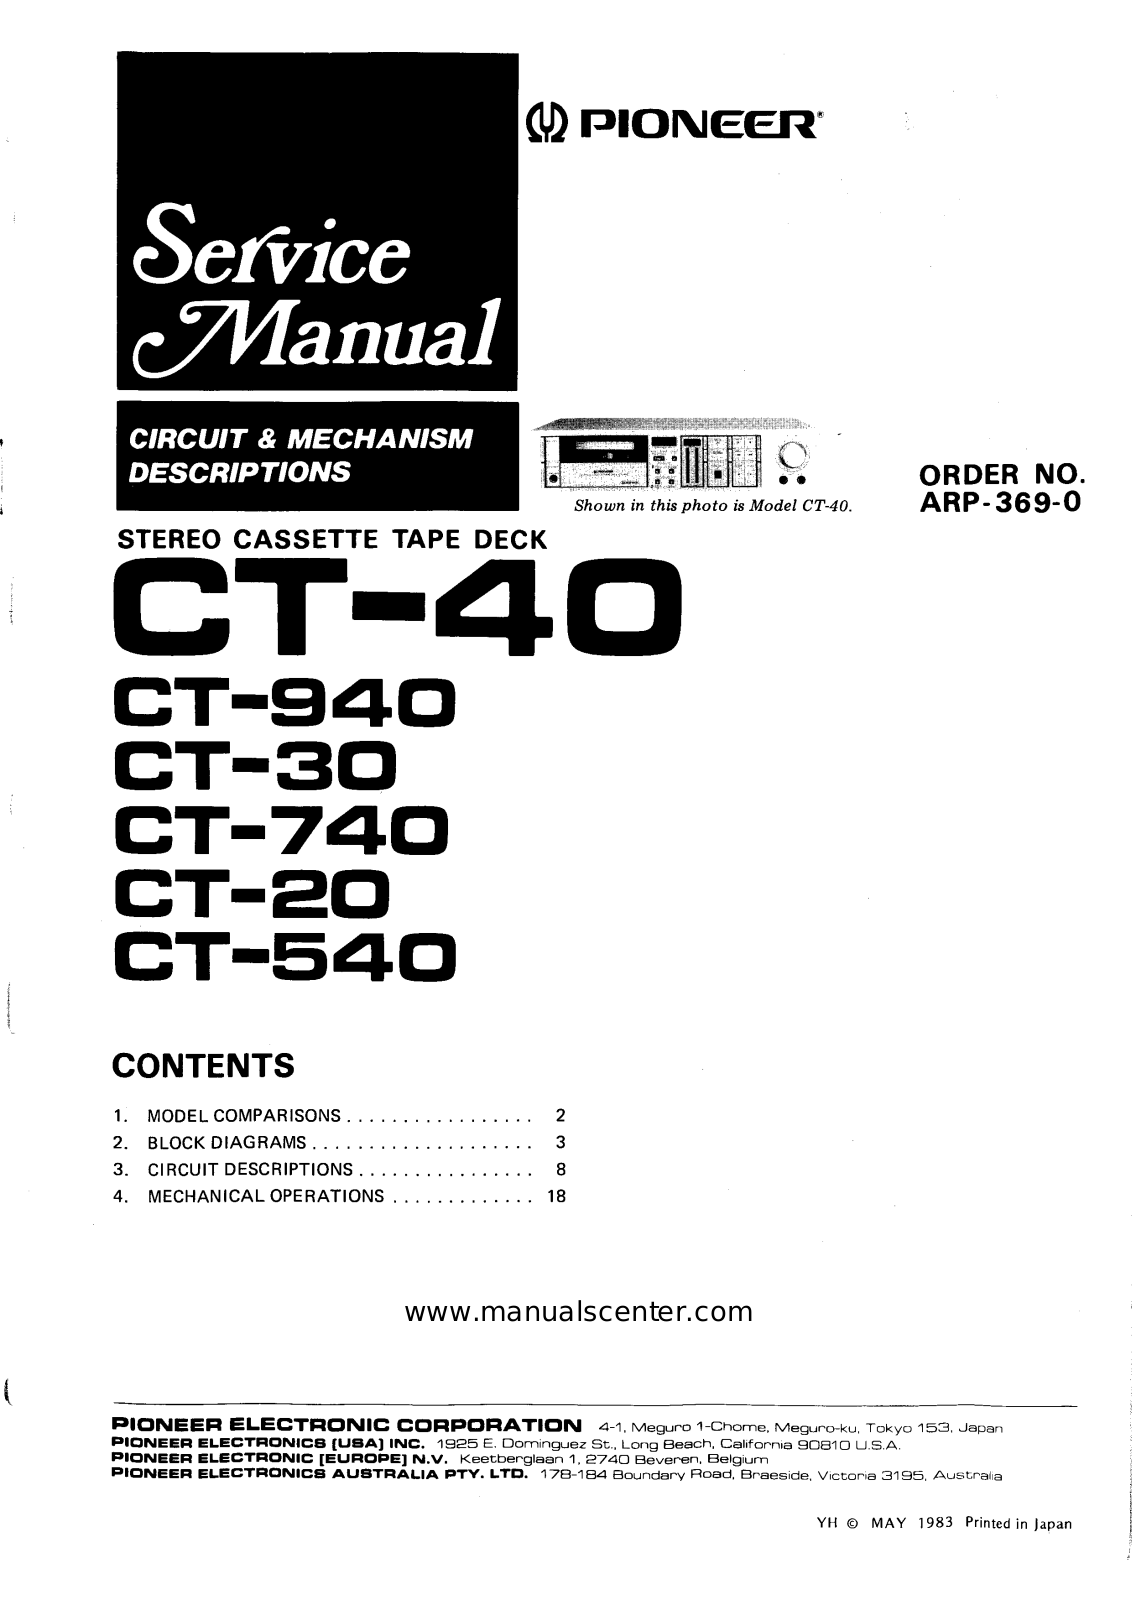 Pioneer CT-20, CT-30, CT-40, CT-740, CT-940 Schematic